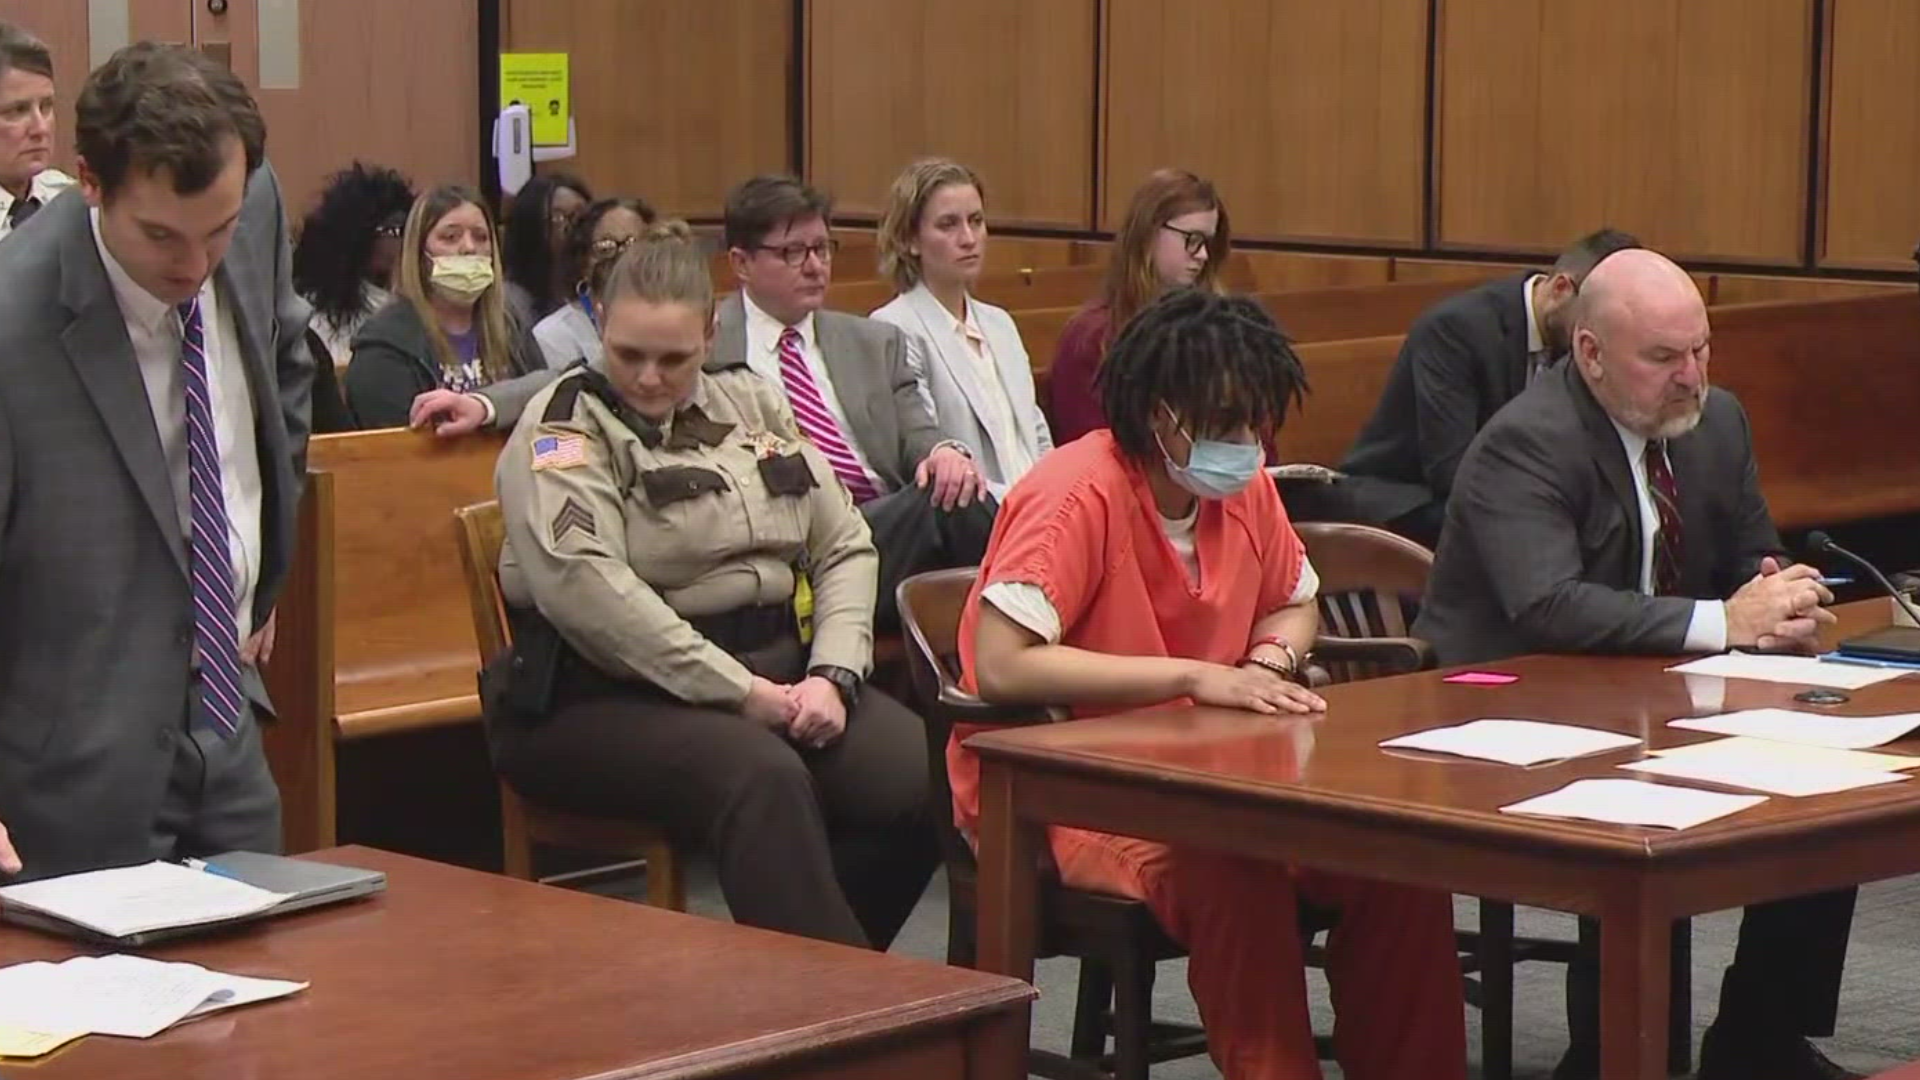 Riley is expected to plead not guilty during an arraignment on Friday. He's accused of causing the crash that caused Edmondson to lose her legs in February.